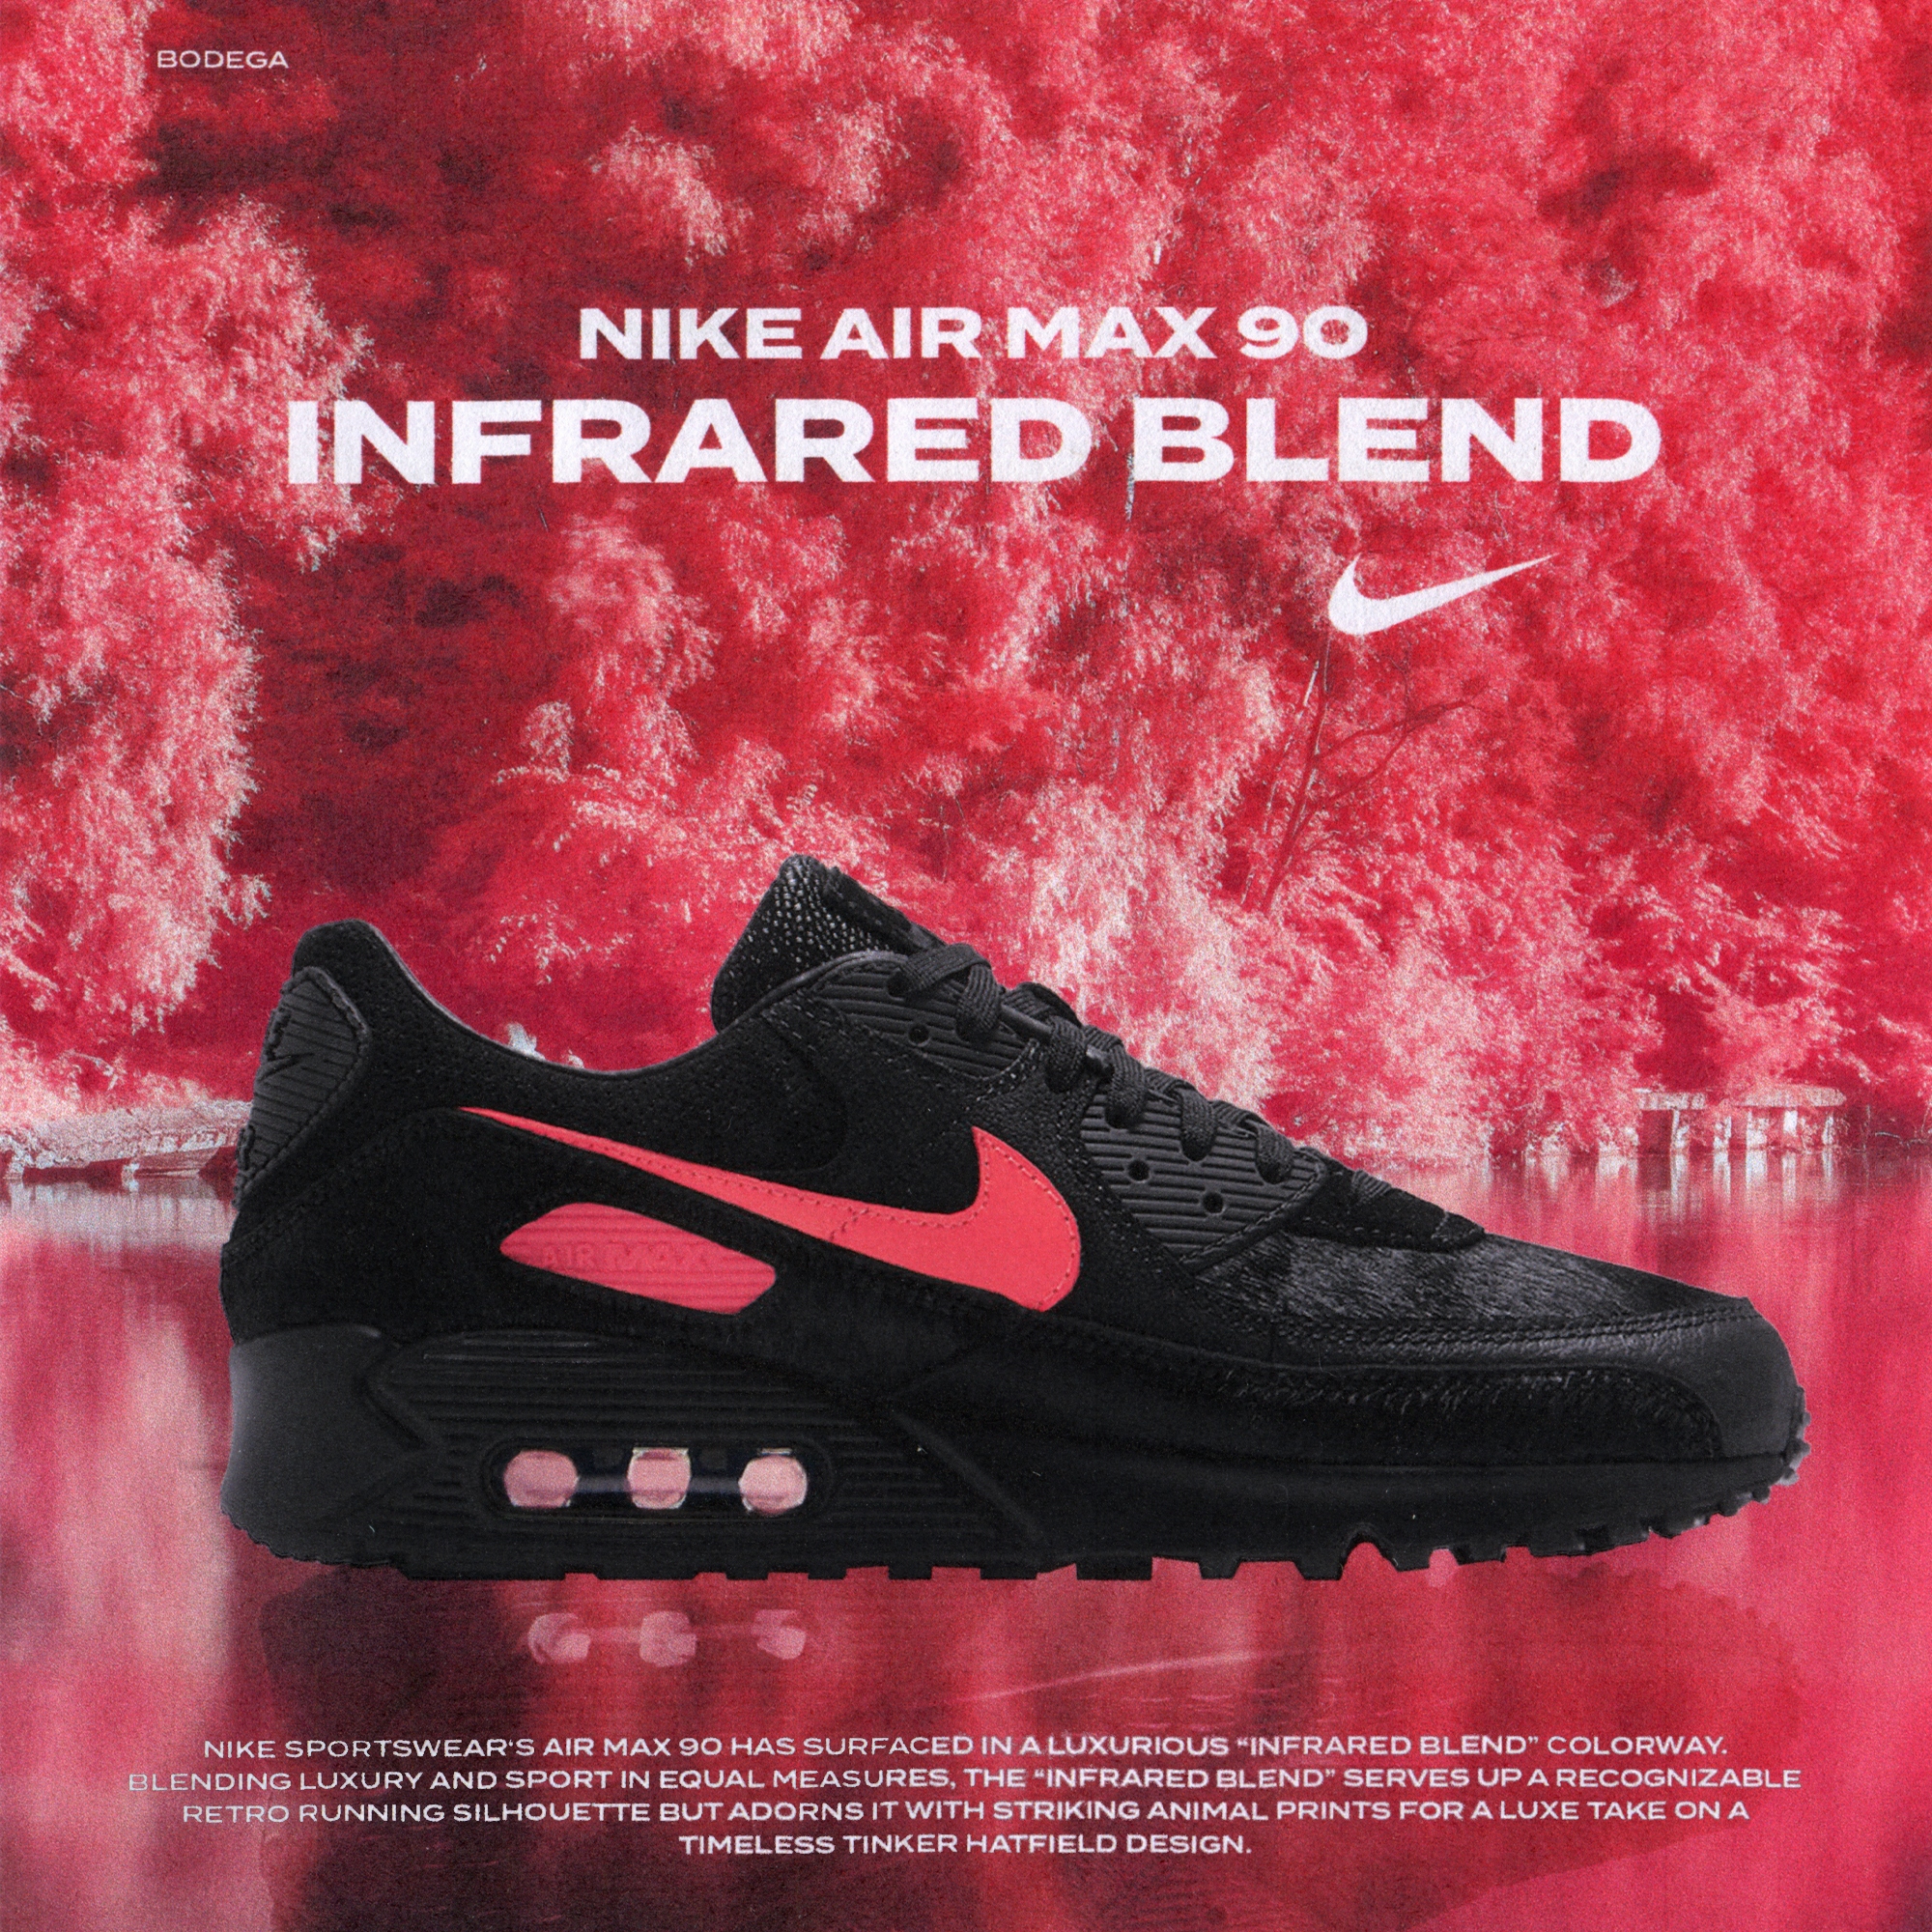 BODEGA on Twitter: "Nike Air Max 90 "Infrared Blend" release tomorrow, ($140) • Available online at EST on a first come, first served basis. Follow the link for more info -